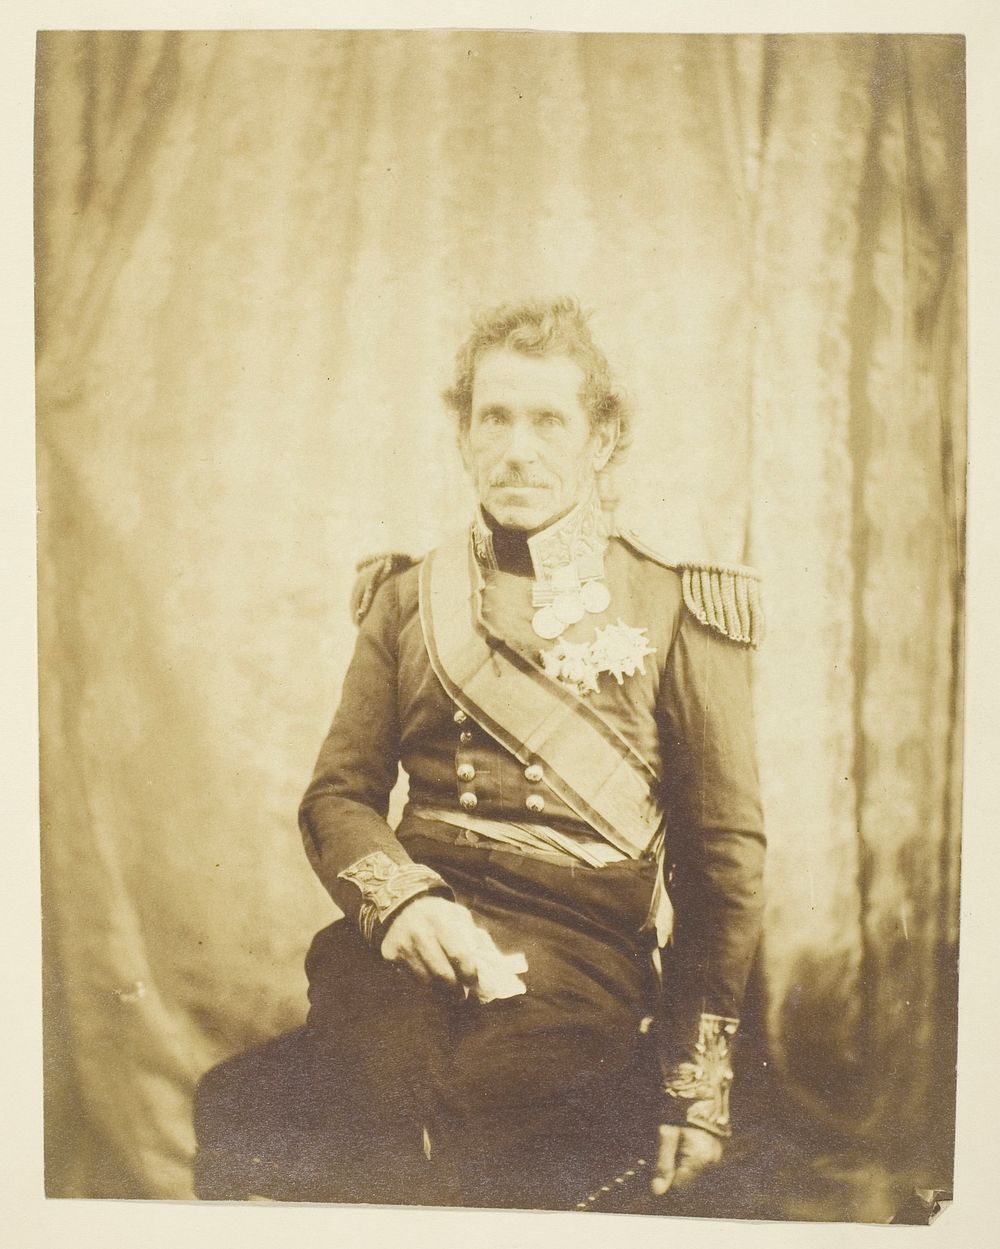 Sir George de Lacy Evans (1787-1870), General, Taken at the Crimea by Roger Fenton